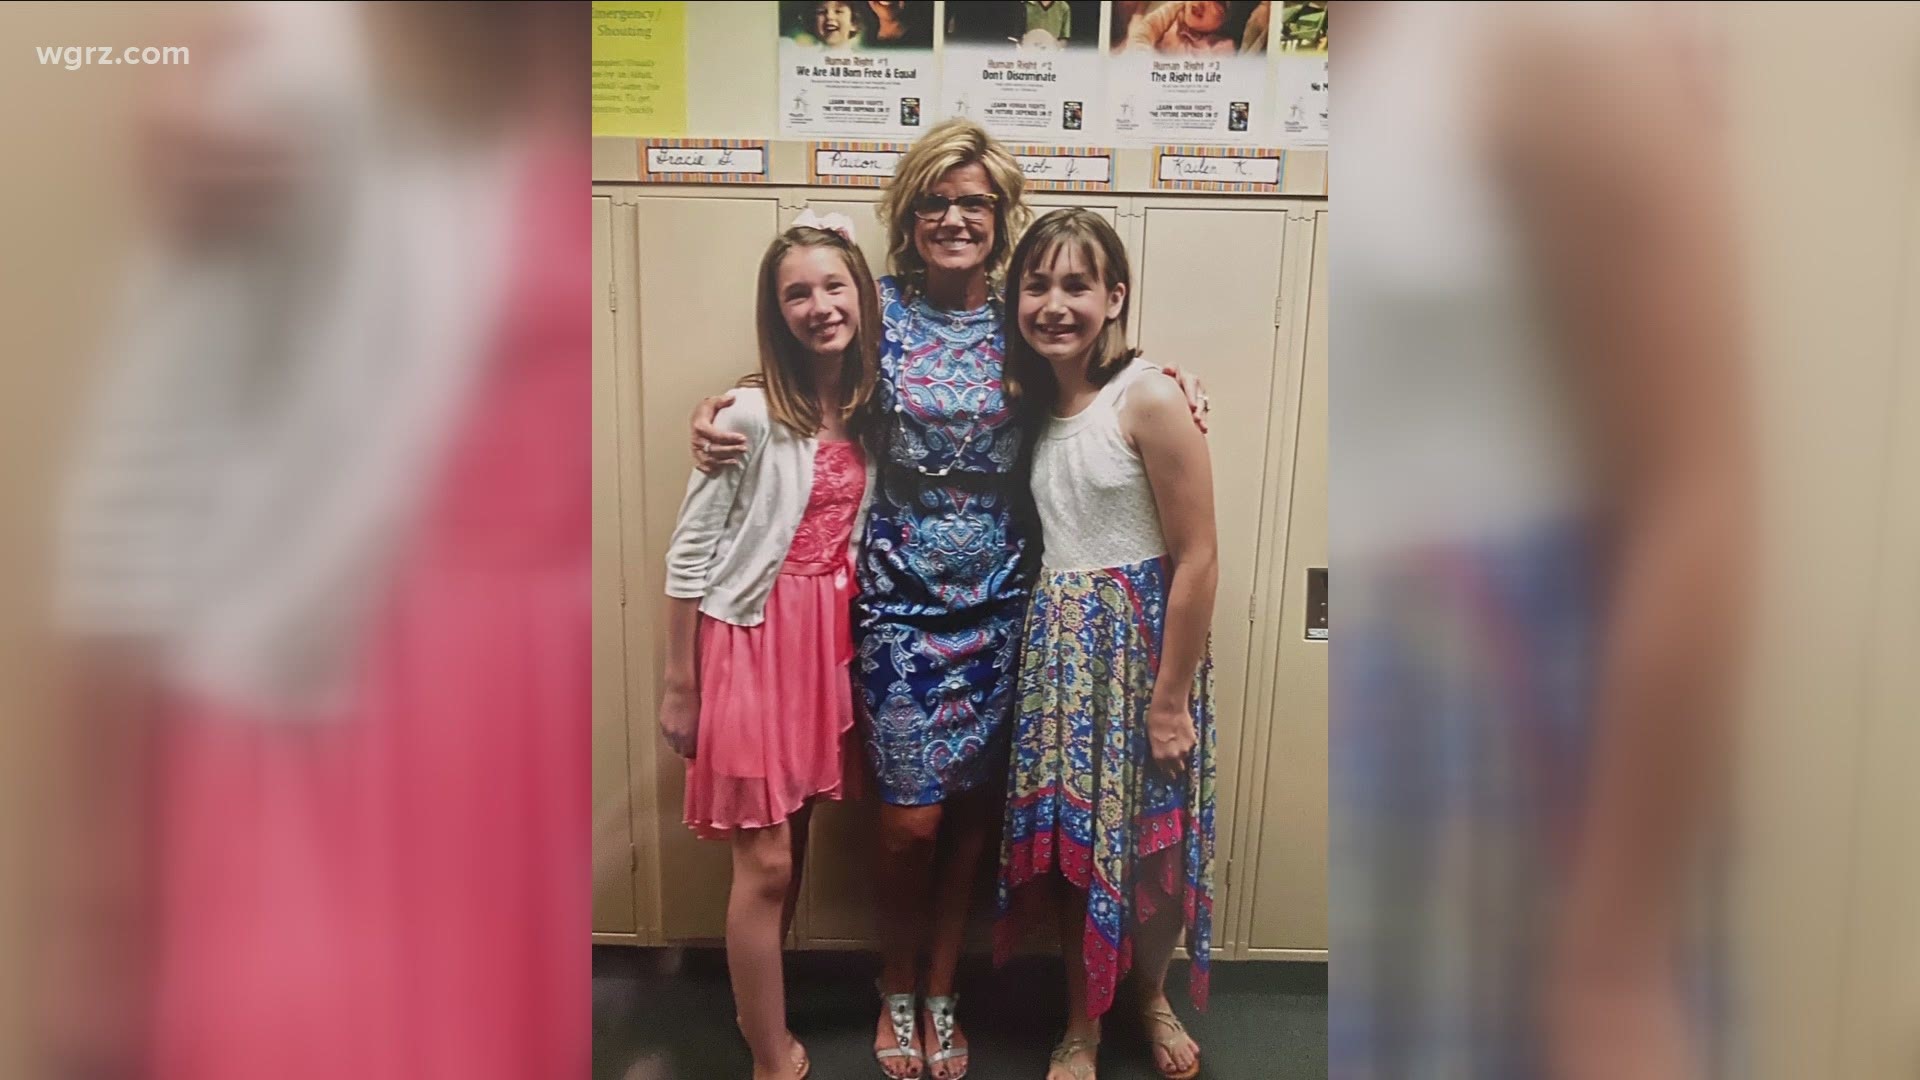 Sydney Deppas is finishing her first year as a teacher while her mom, Melissa, is marking the end of her 31-year career in education.